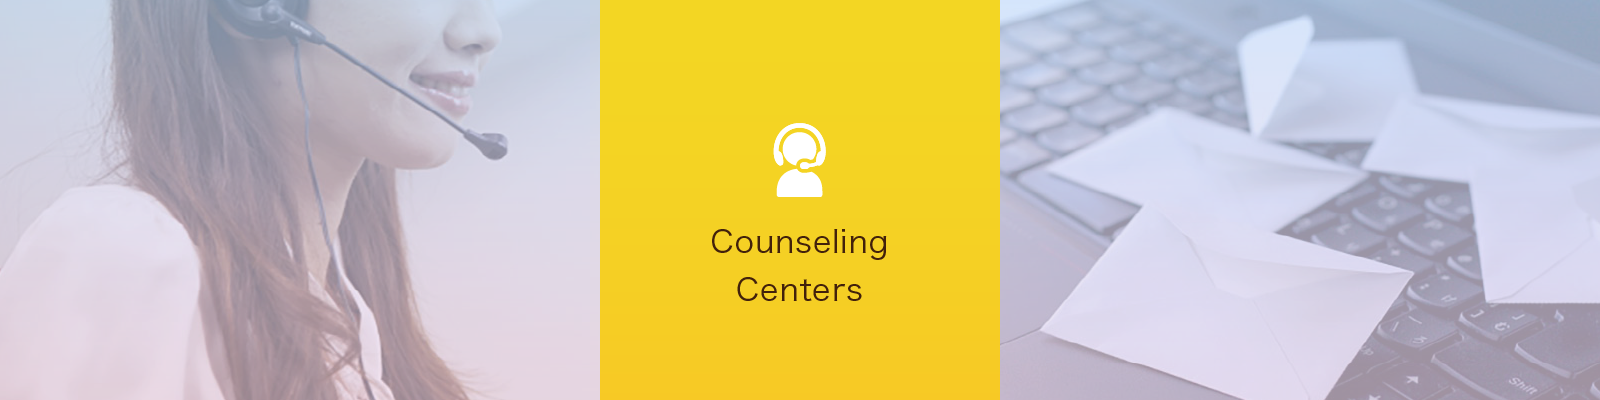 Counseling Centers